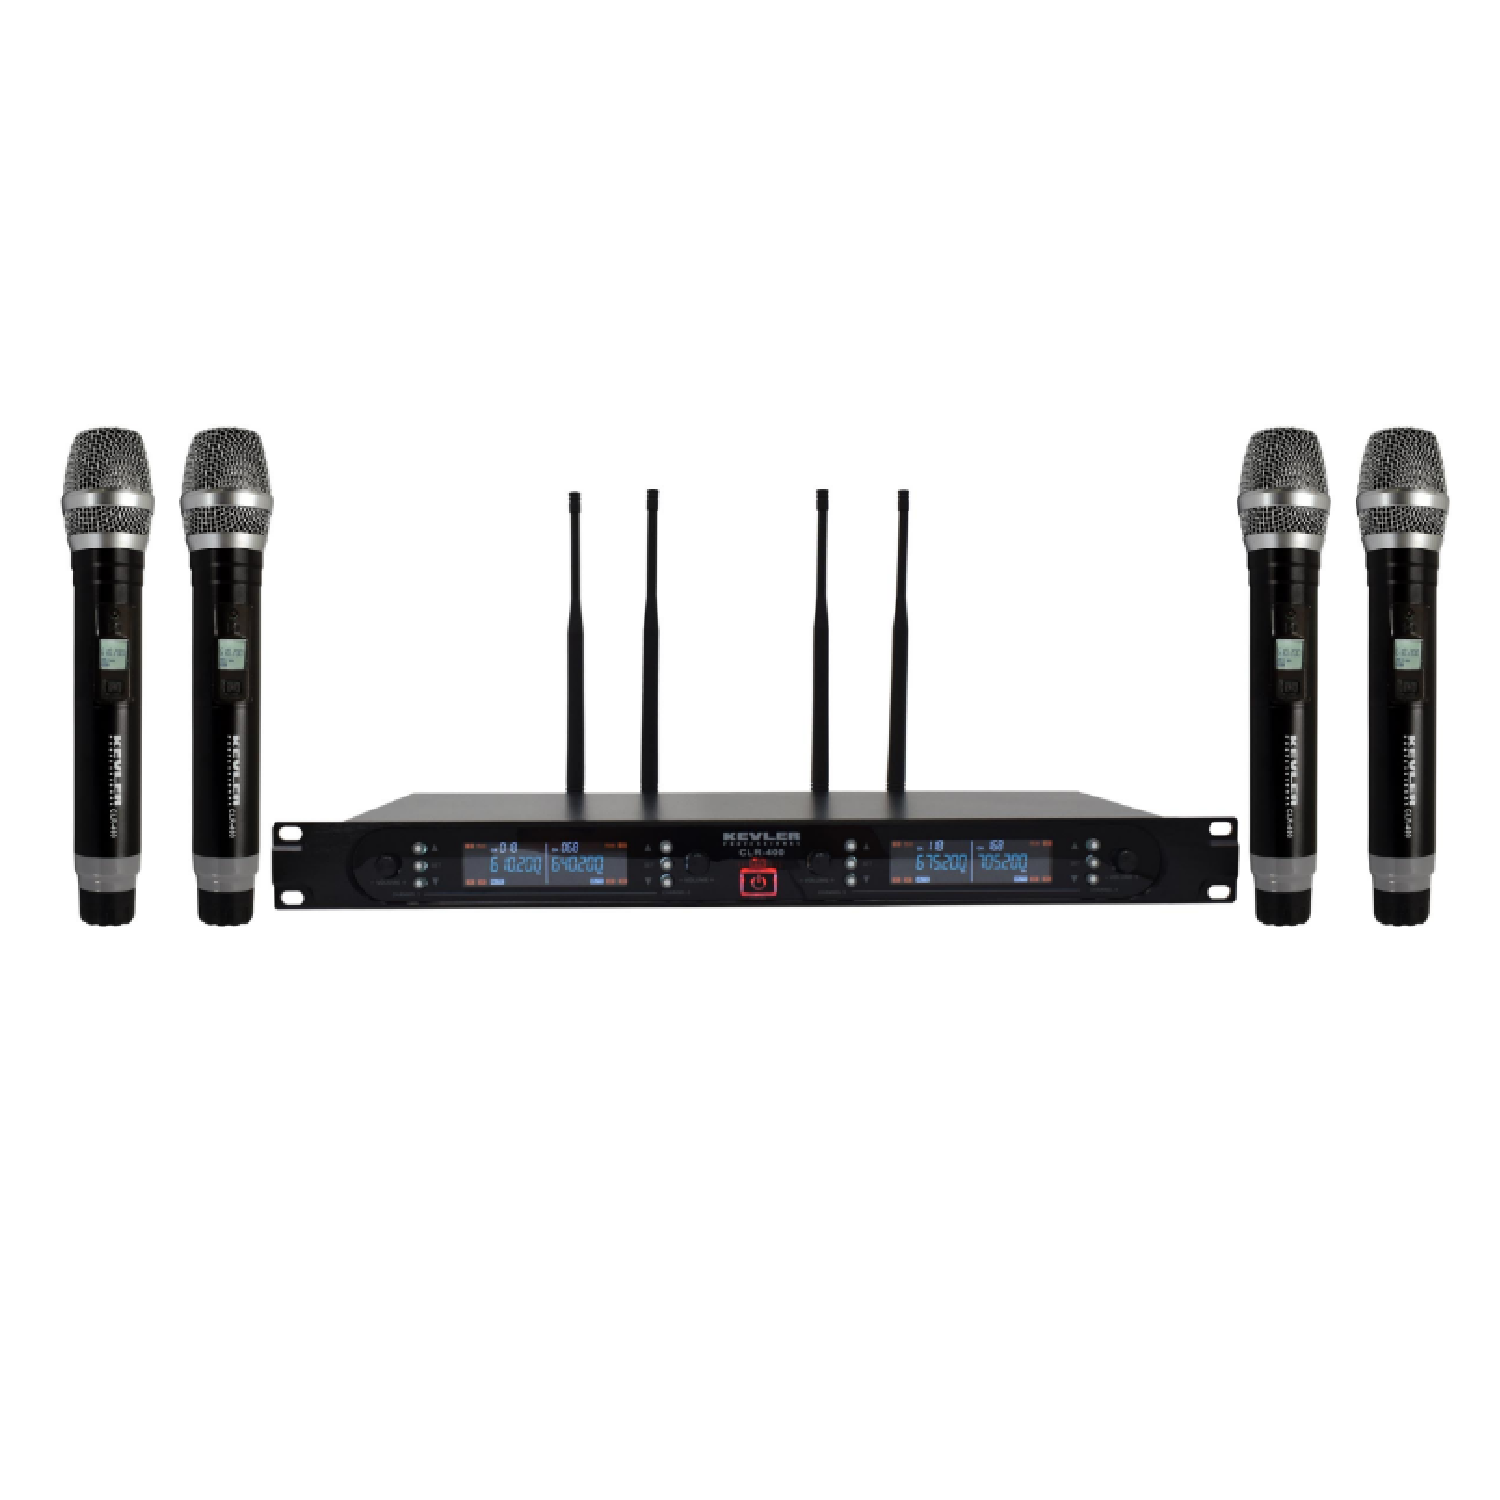 4 Channel UHF Wireless Handheld Microphone with 200 Selectable Frequencies 600 - 724 MHz   CLR400 kevler